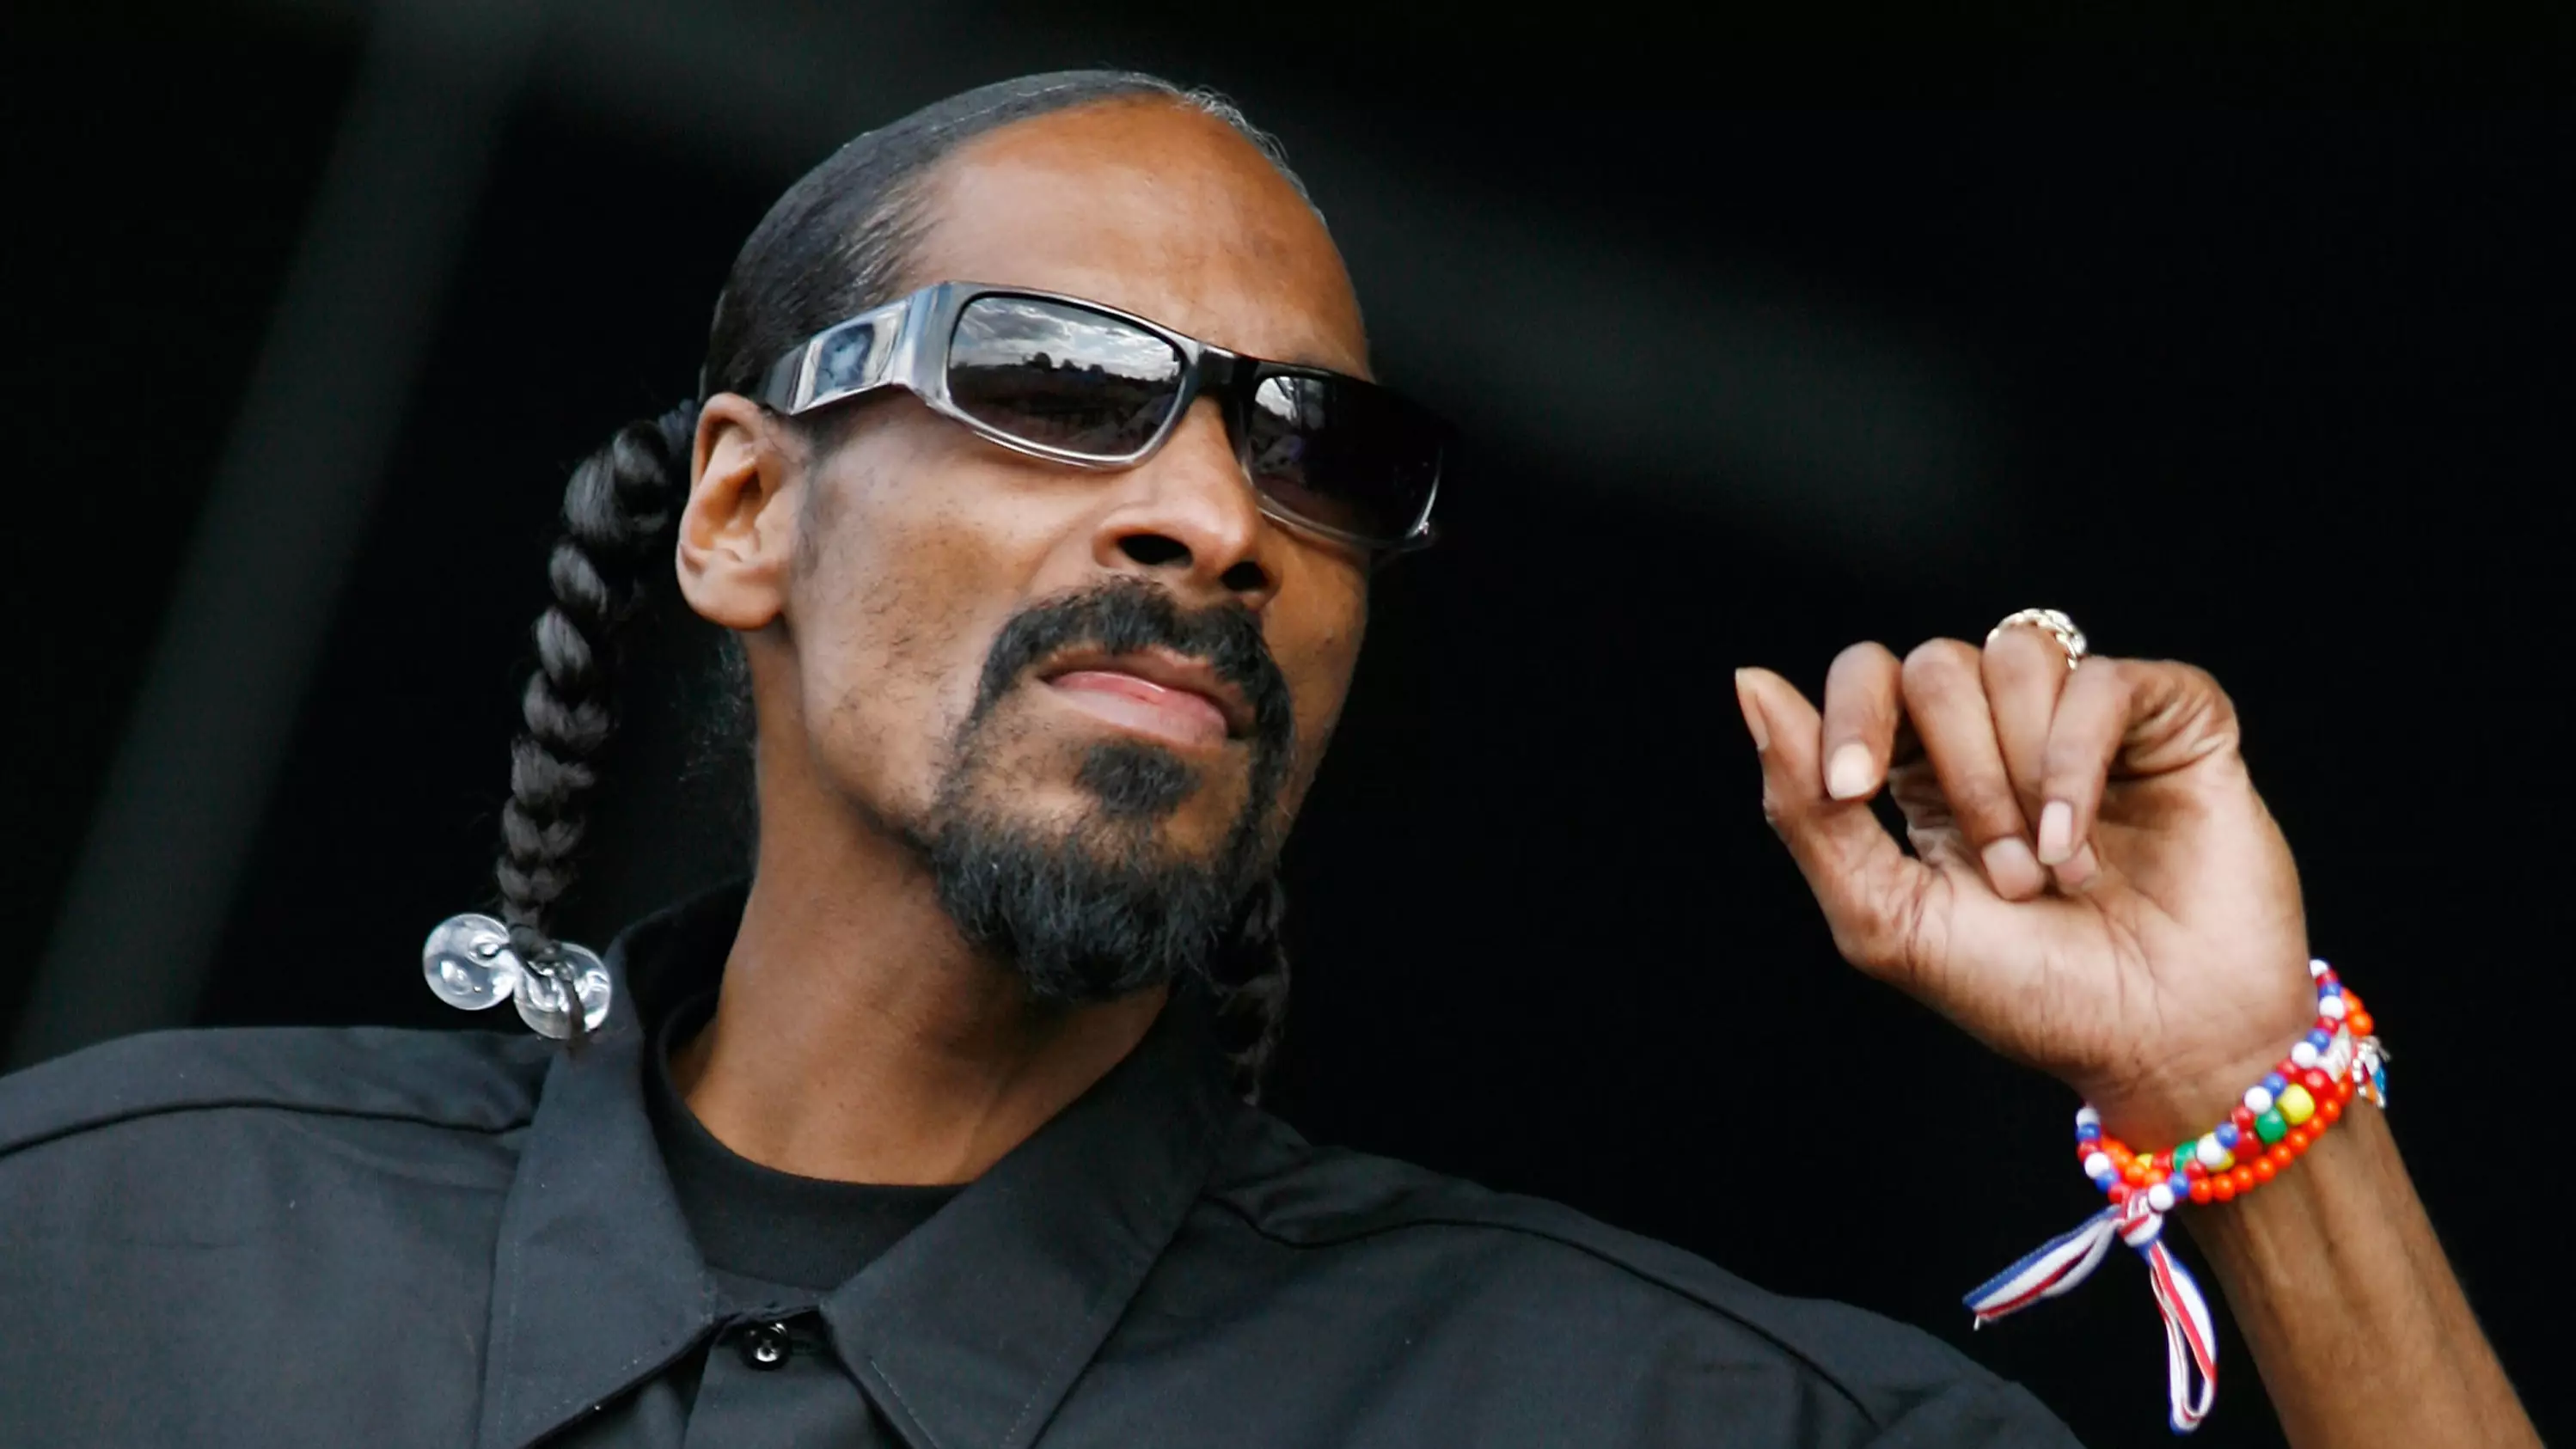 Snoop Dogg Offered $1 Million To Commentate Porn For Blind People